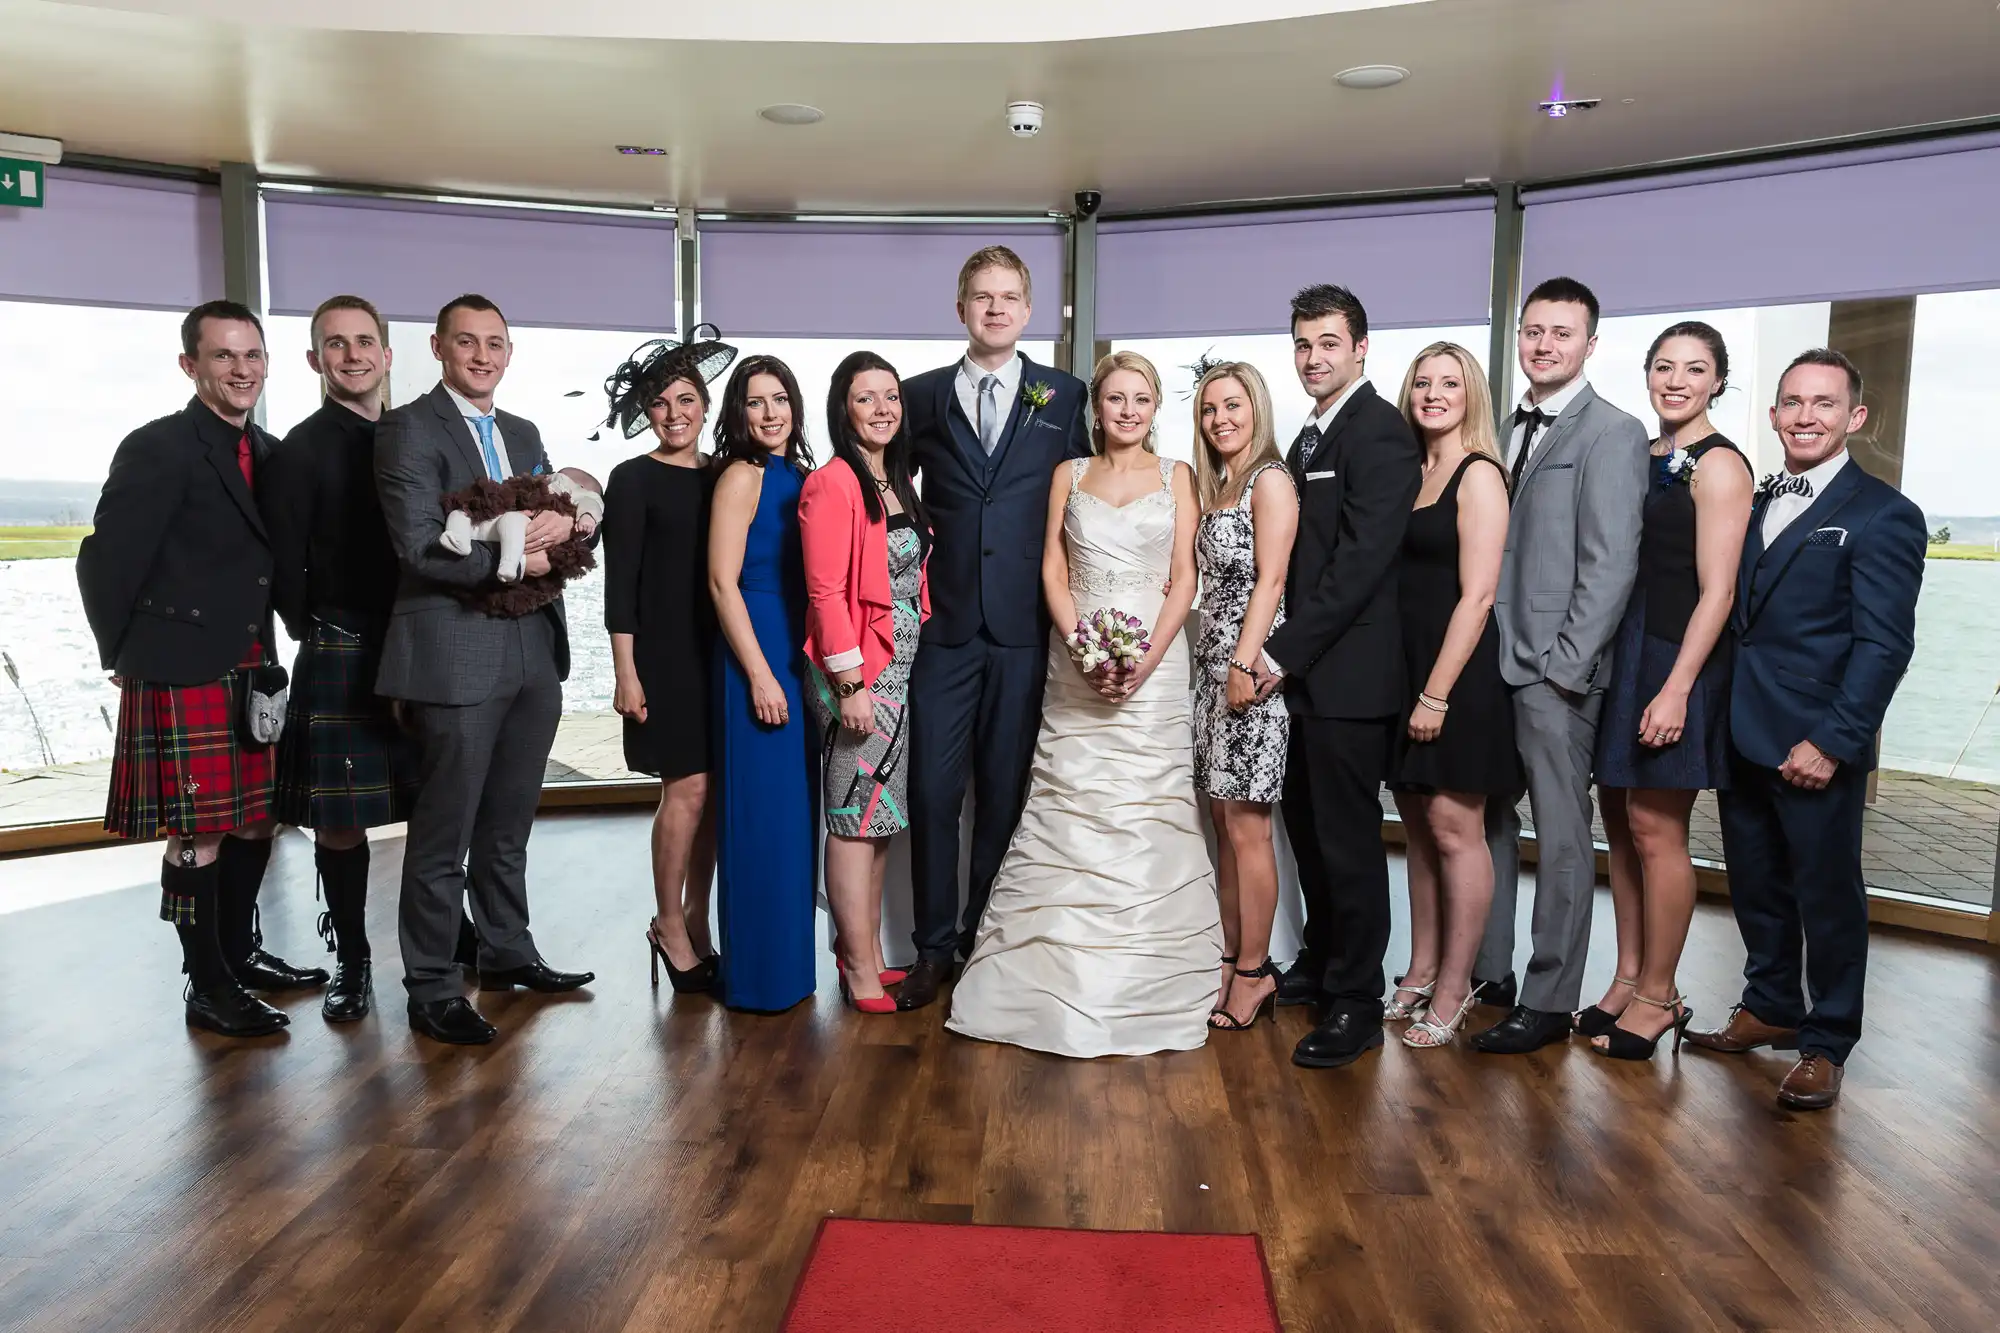 A group of elegantly dressed guests posing with a bride and groom in a room with large windows overlooking a body of water.